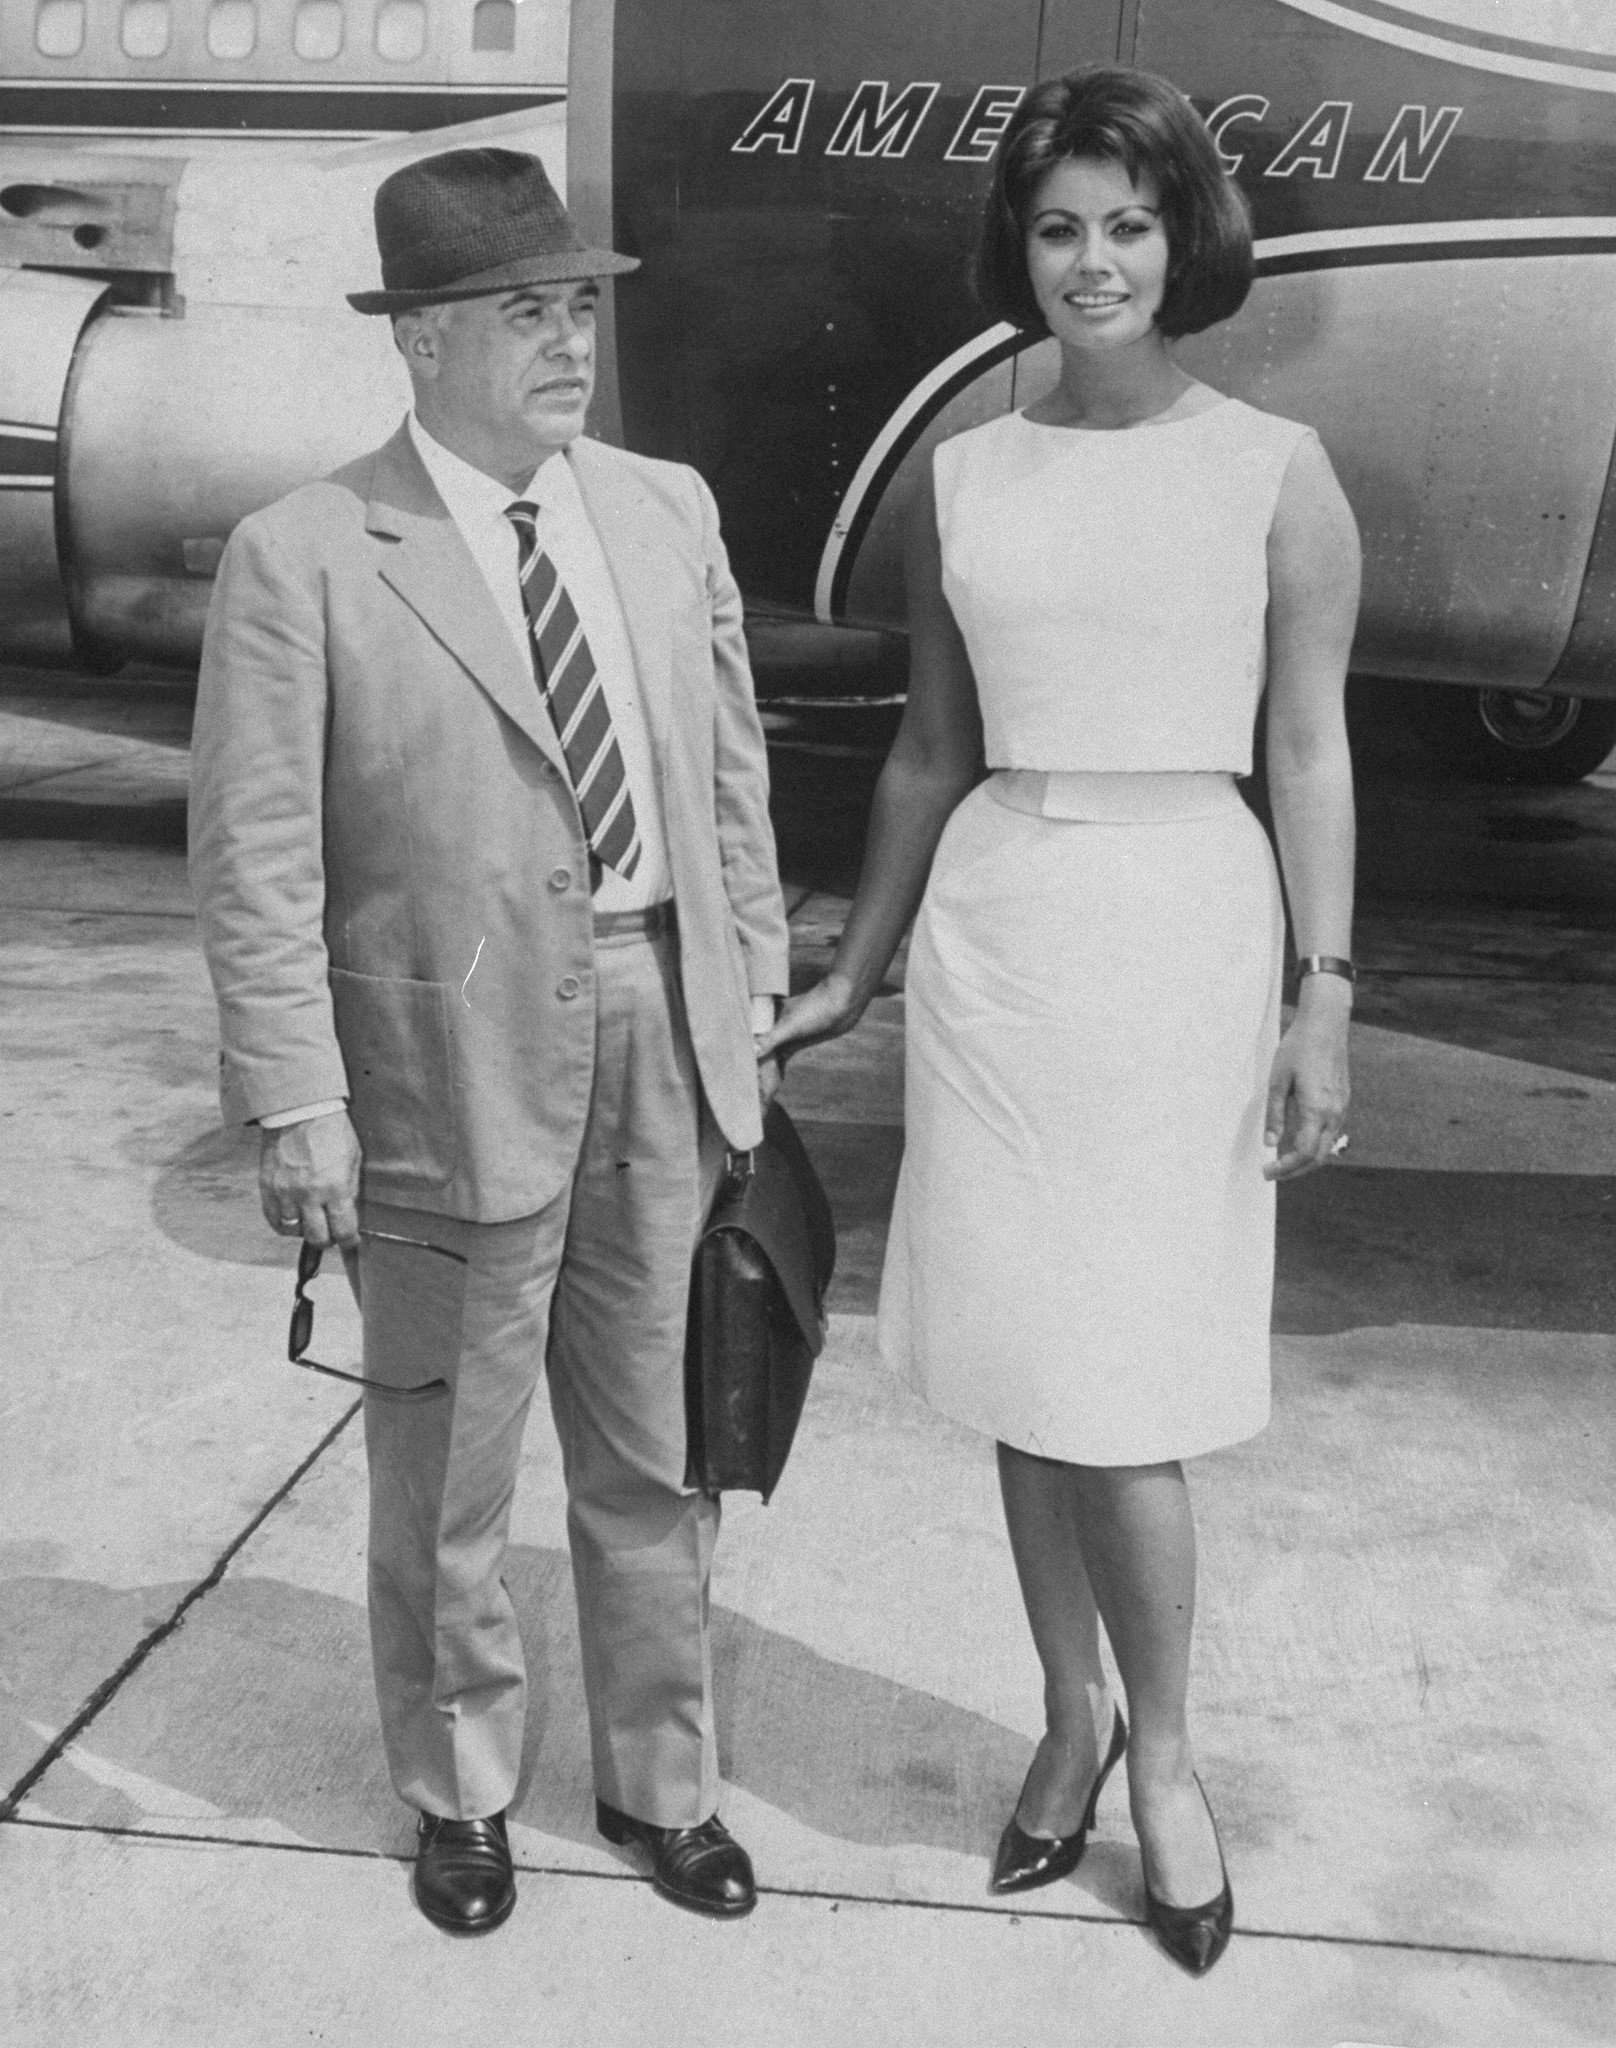 Sophia Loren with her husband, Carlo Ponti, before boarding jet plane at Idlewild Airport for the West Coast. | Photo: Getty Images